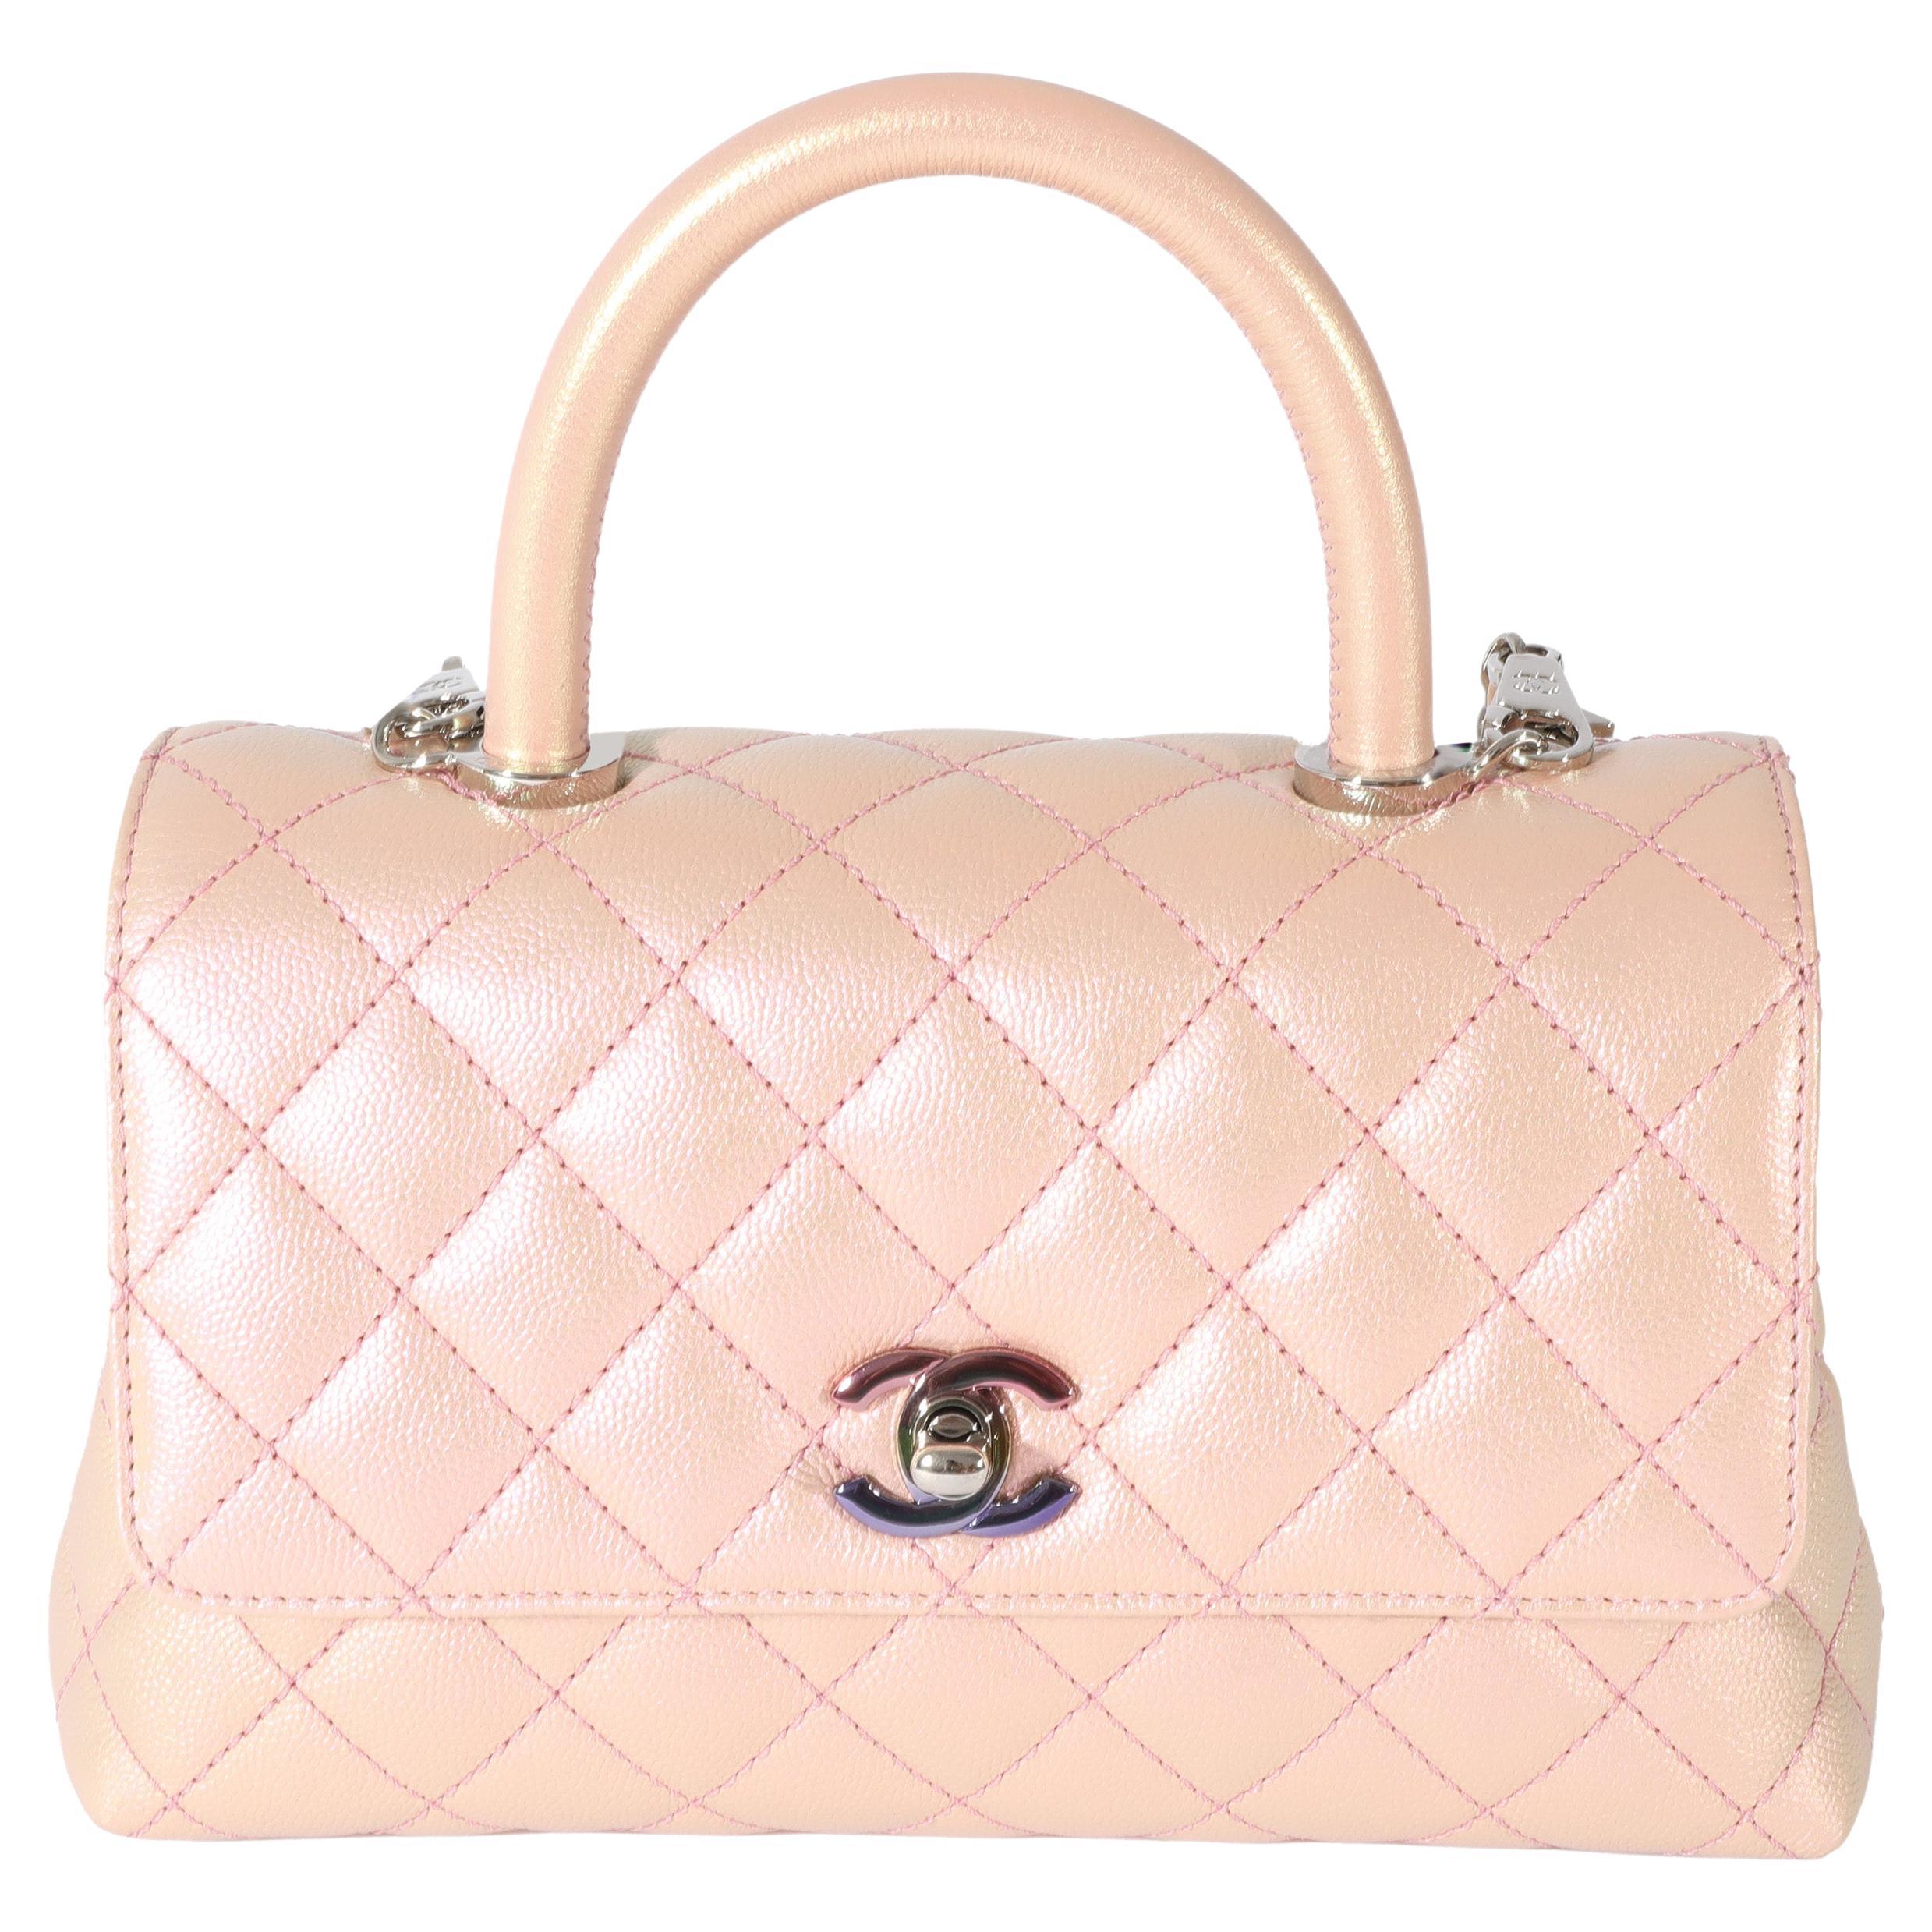 Pink Coco Chanel Purse - 22 For Sale on 1stDibs